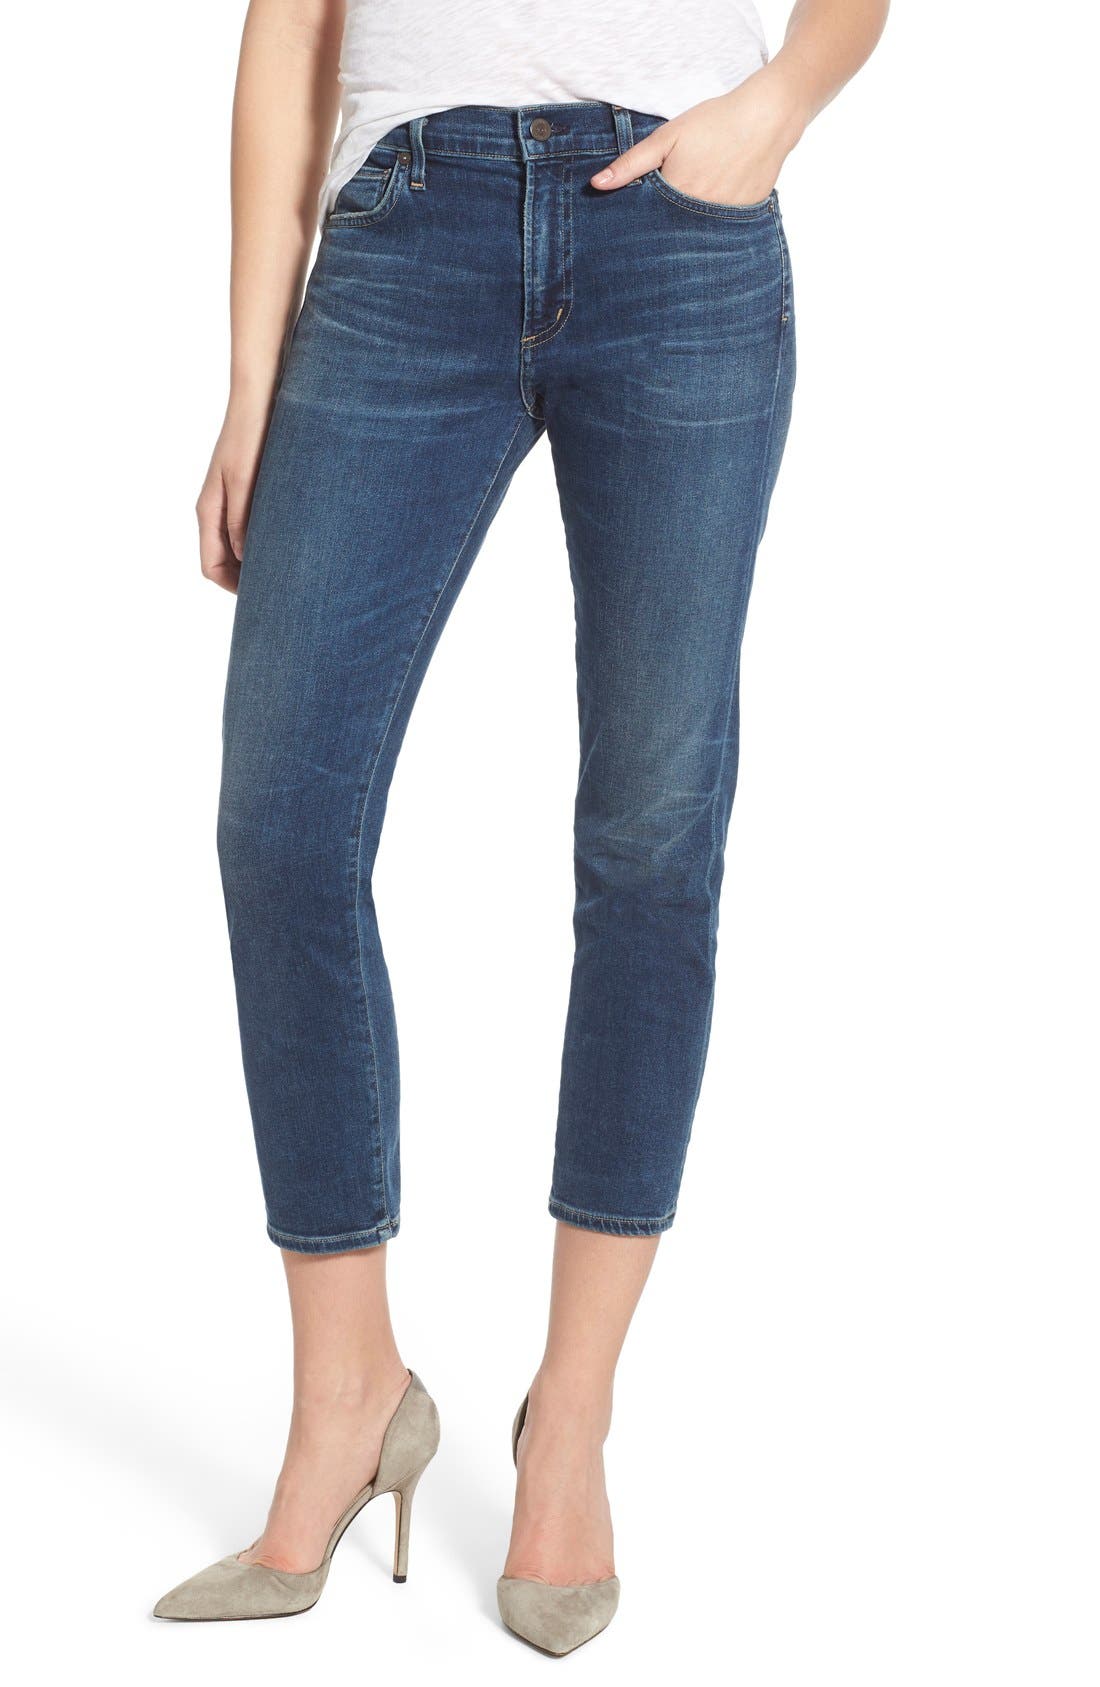 citizens of humanity agnes slim straight jeans